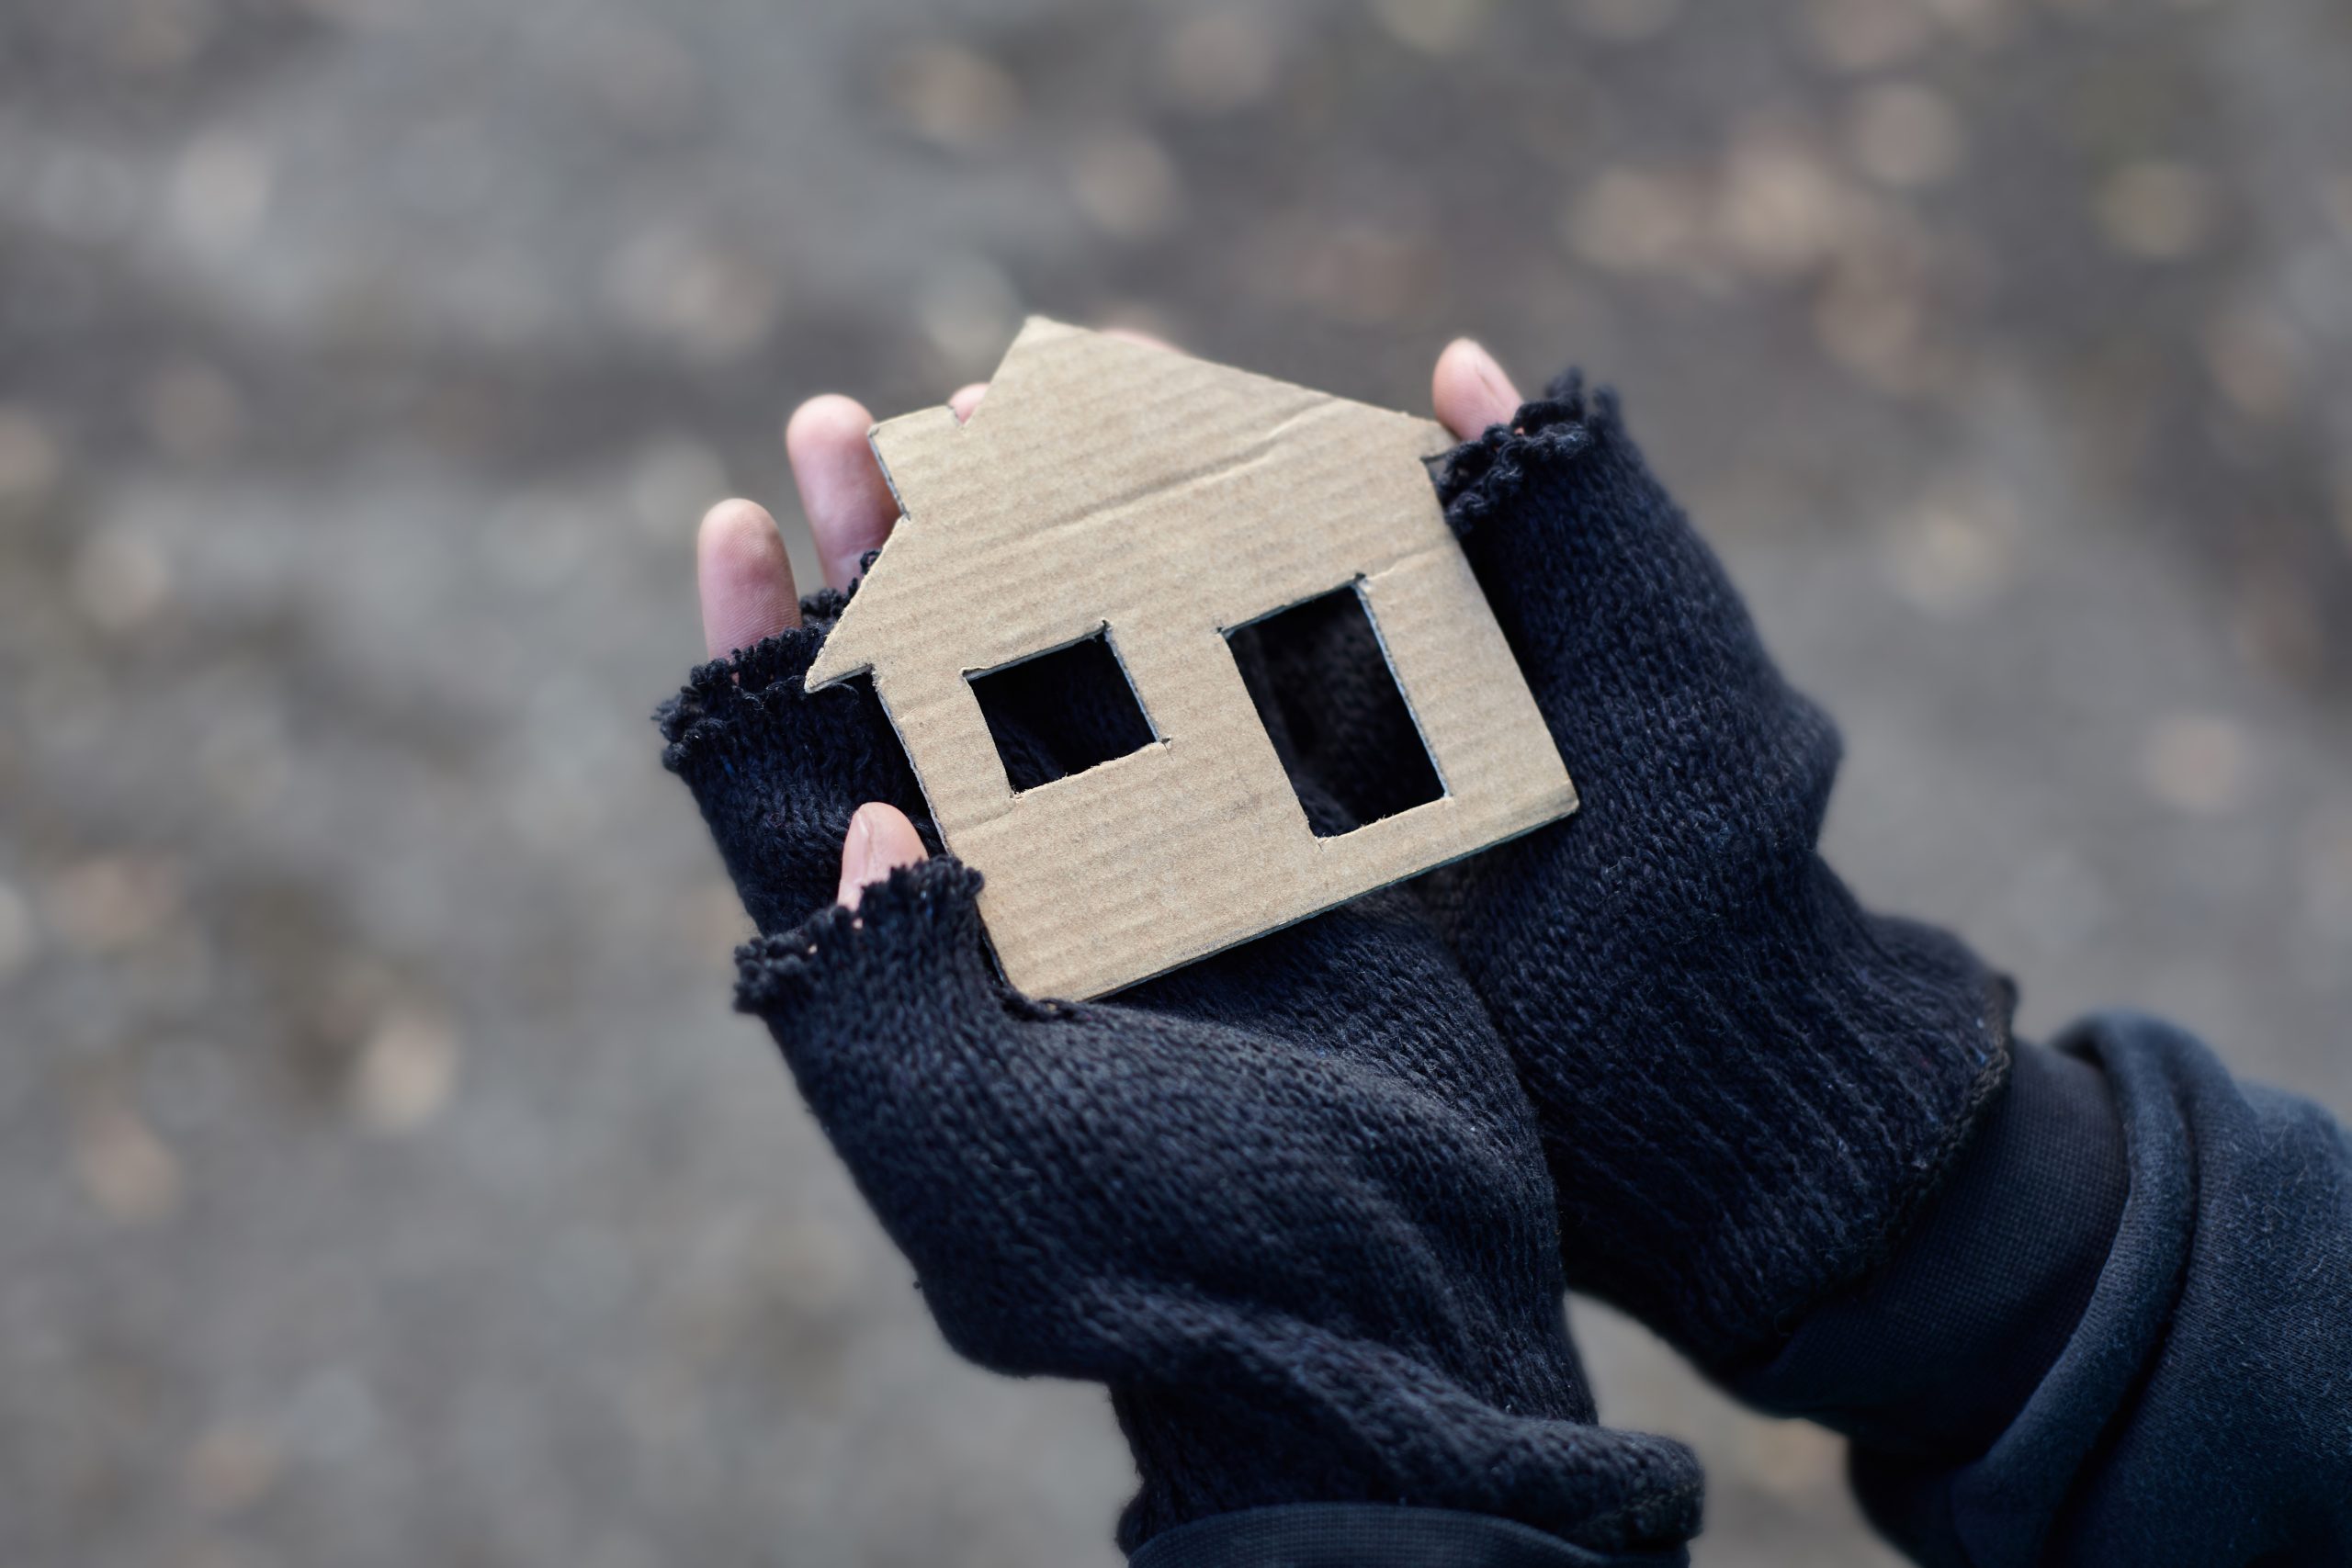 image of two hands wearing worn gloves, holding a cardboard cutout shaped like a house, symbolizing efforts to find housing options and advocate for individuals with severe mental illness